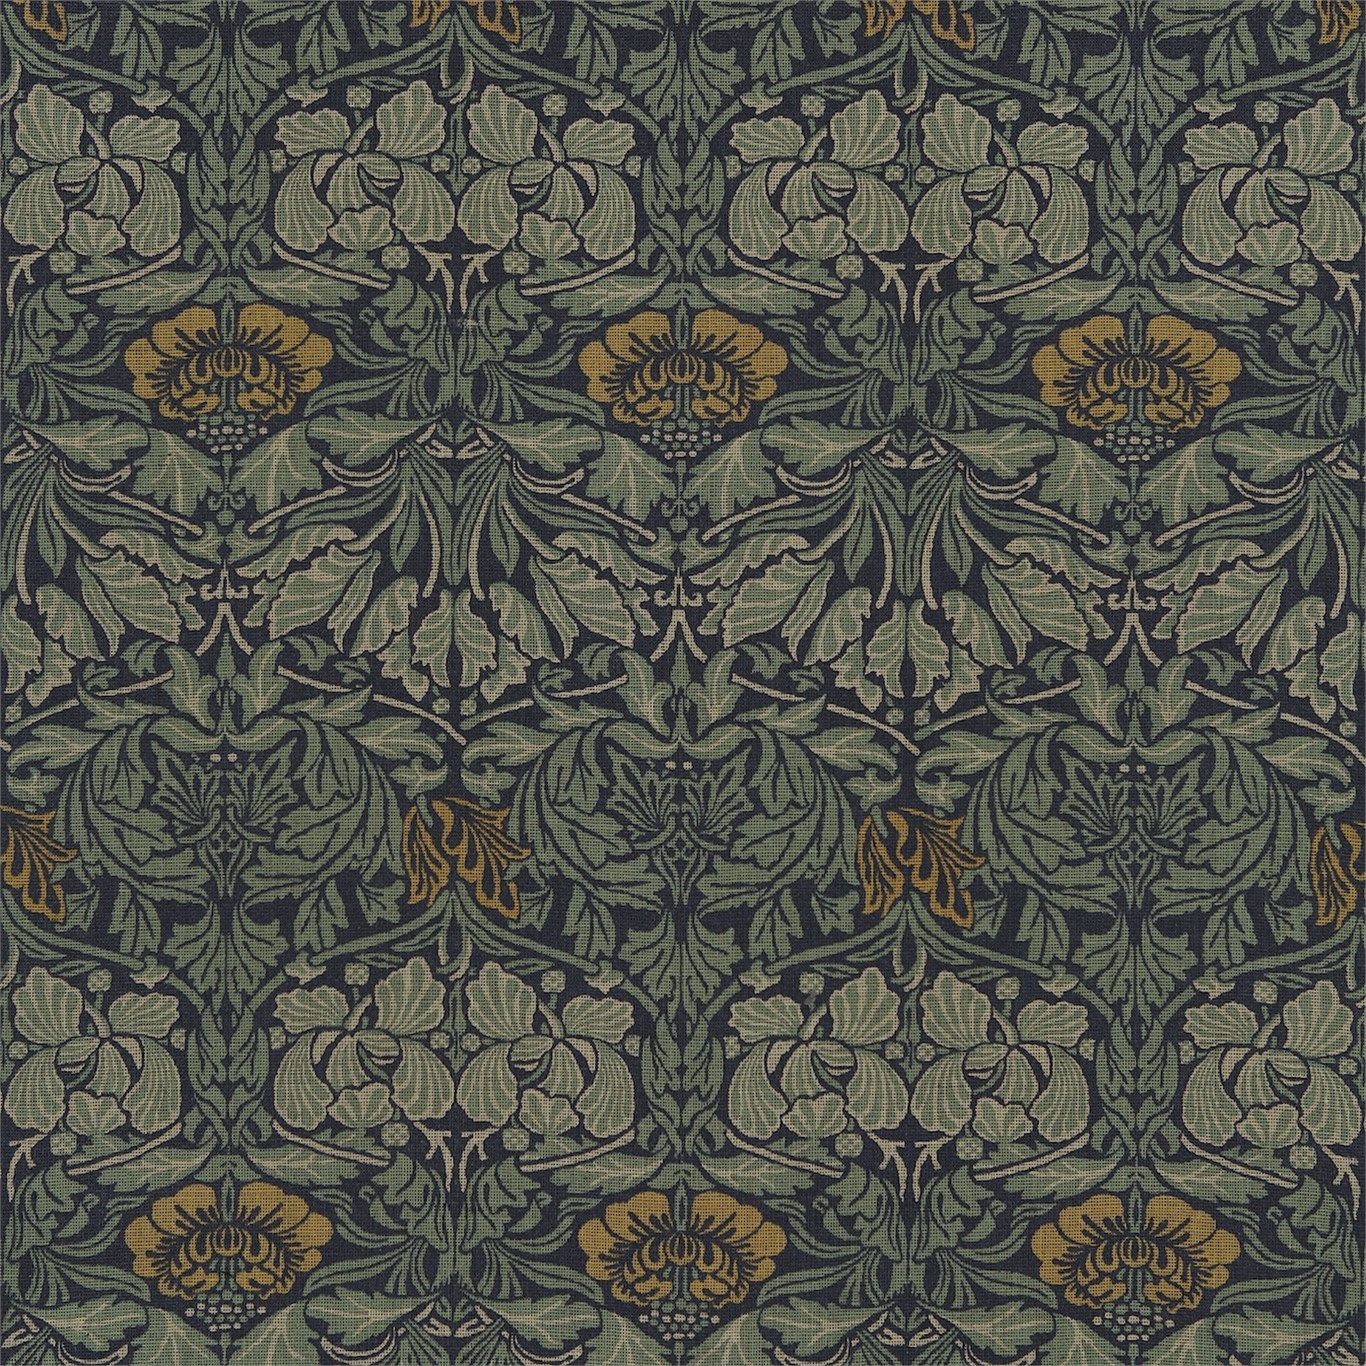 The Original Morris & Co and crafts, fabrics and wallpaper designs by William Morris &. Arts and crafts interiors, William morris, Arts and crafts movement